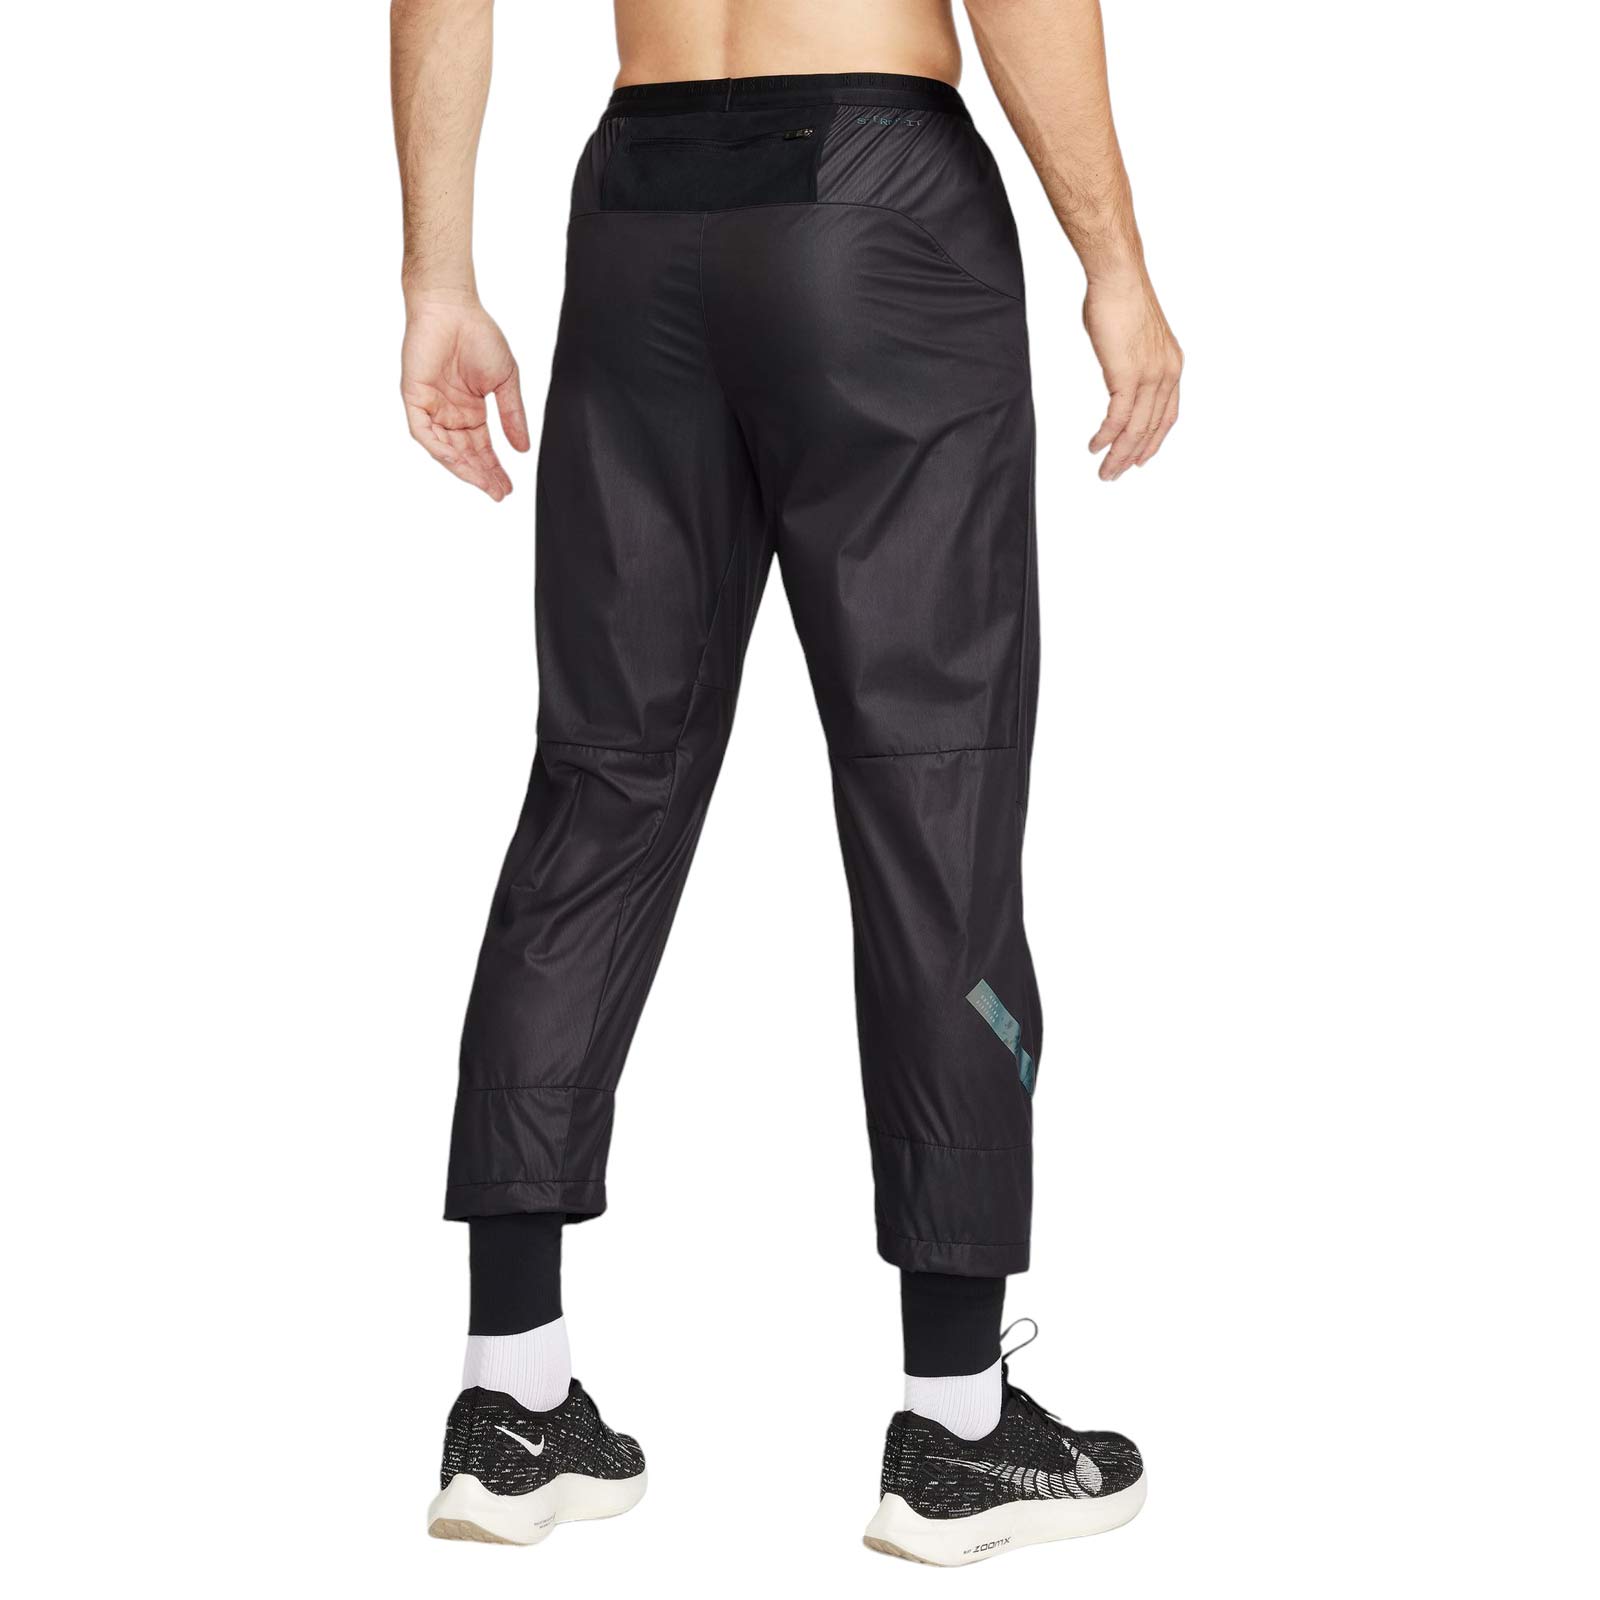 NIKE RUNNING DIVISION PHENOM MENS STORM-FIT RUNNING TROUSERS